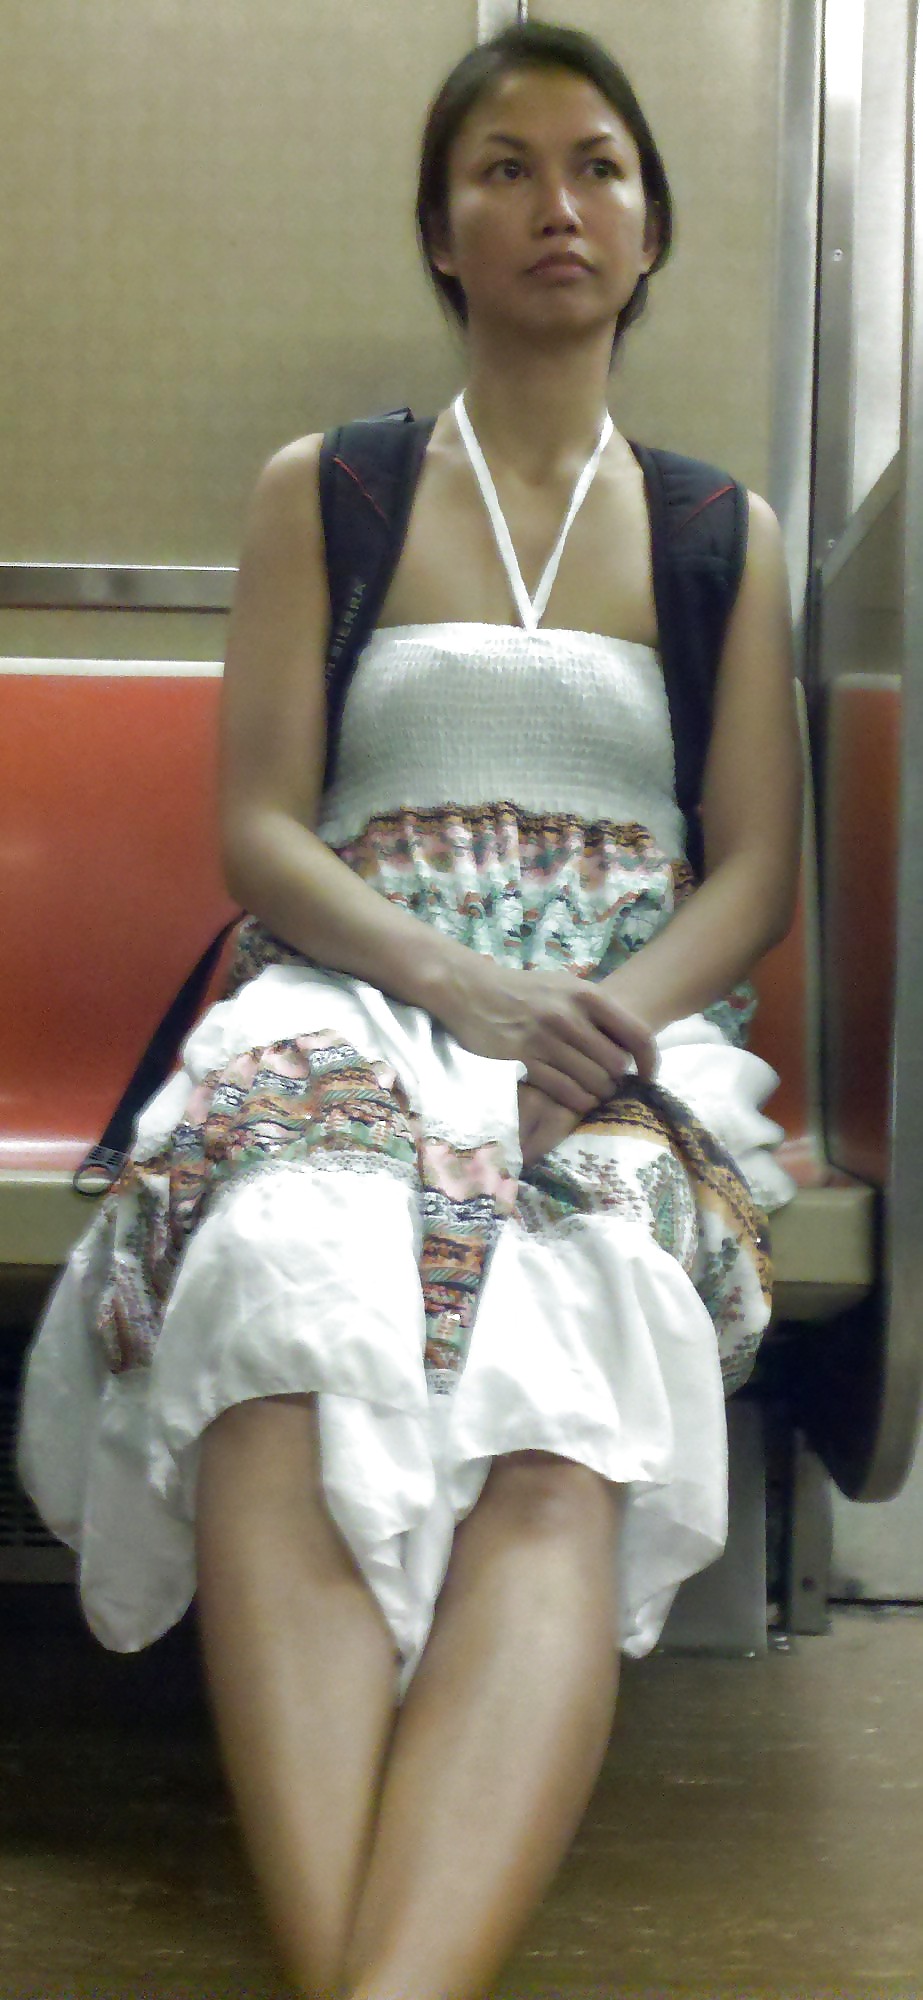 New York Subway Girls Compilation 1 - Legs and Thighs #6590246